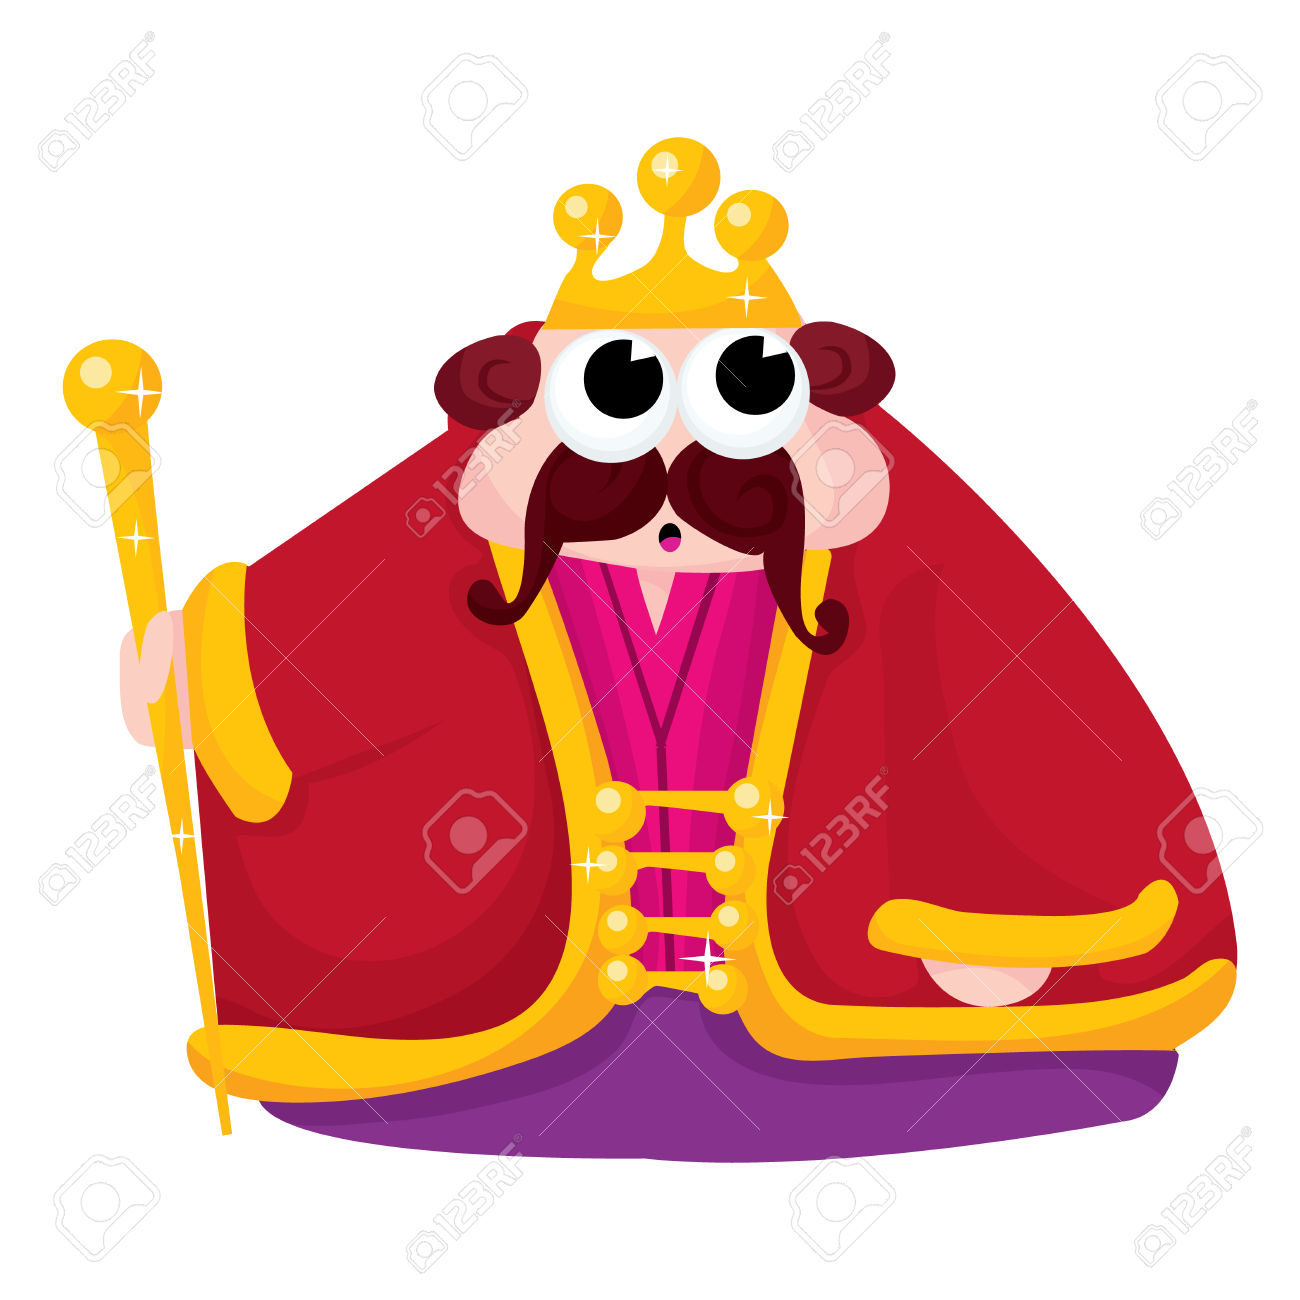 king henry clipart - photo #44